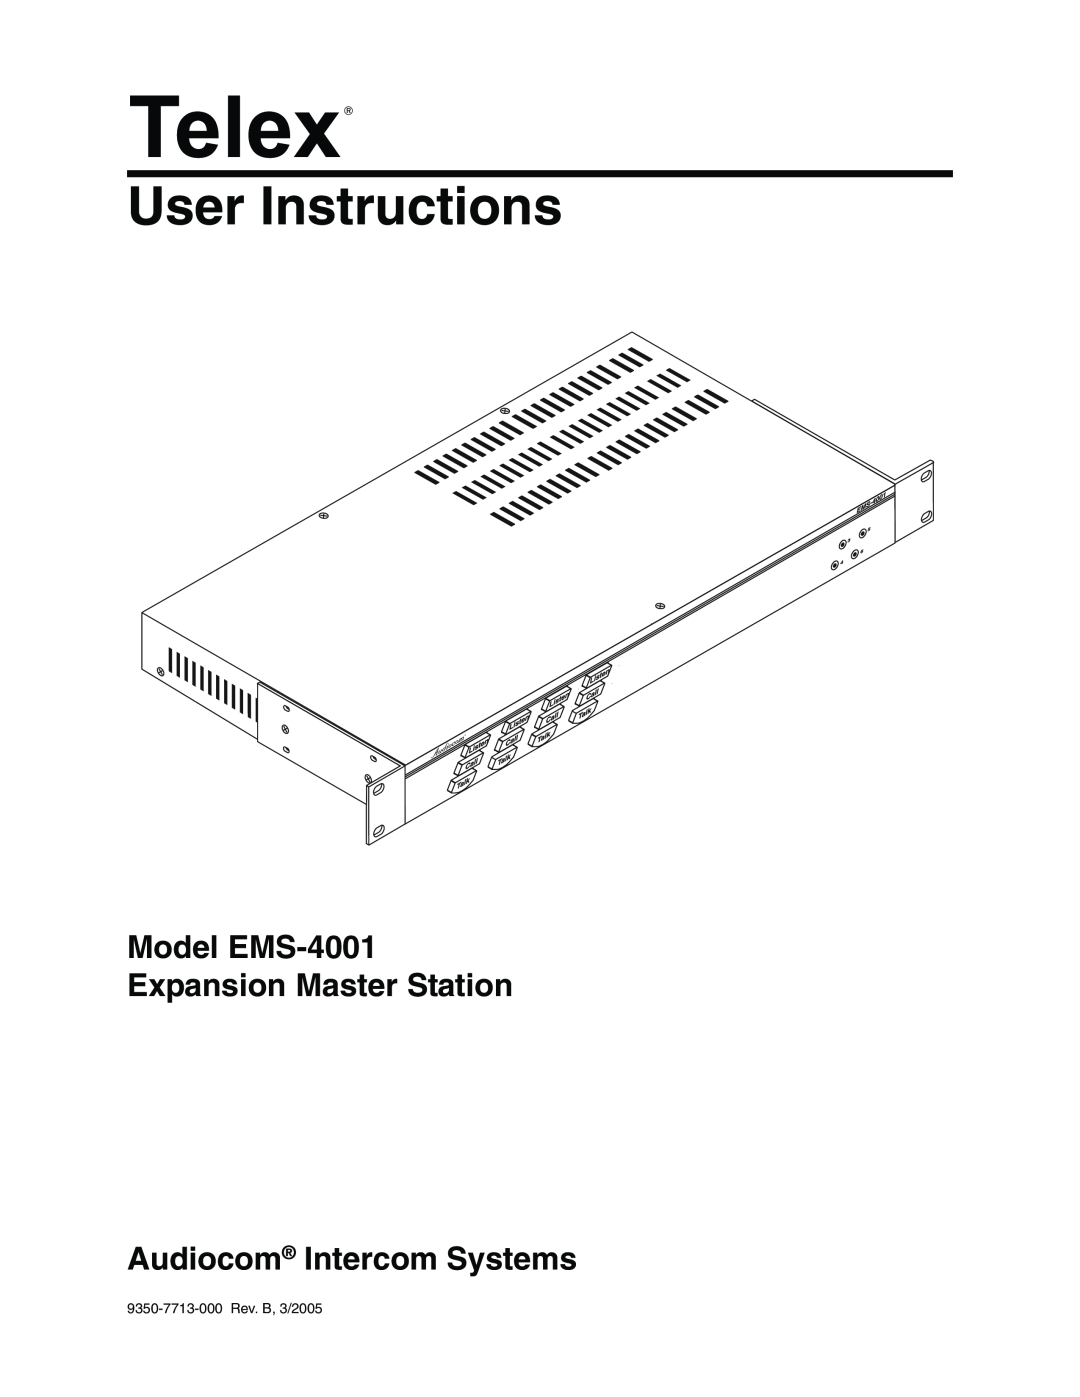 Telex EMS-4001 manual Expansion Master Station, Features, Line Drawing 